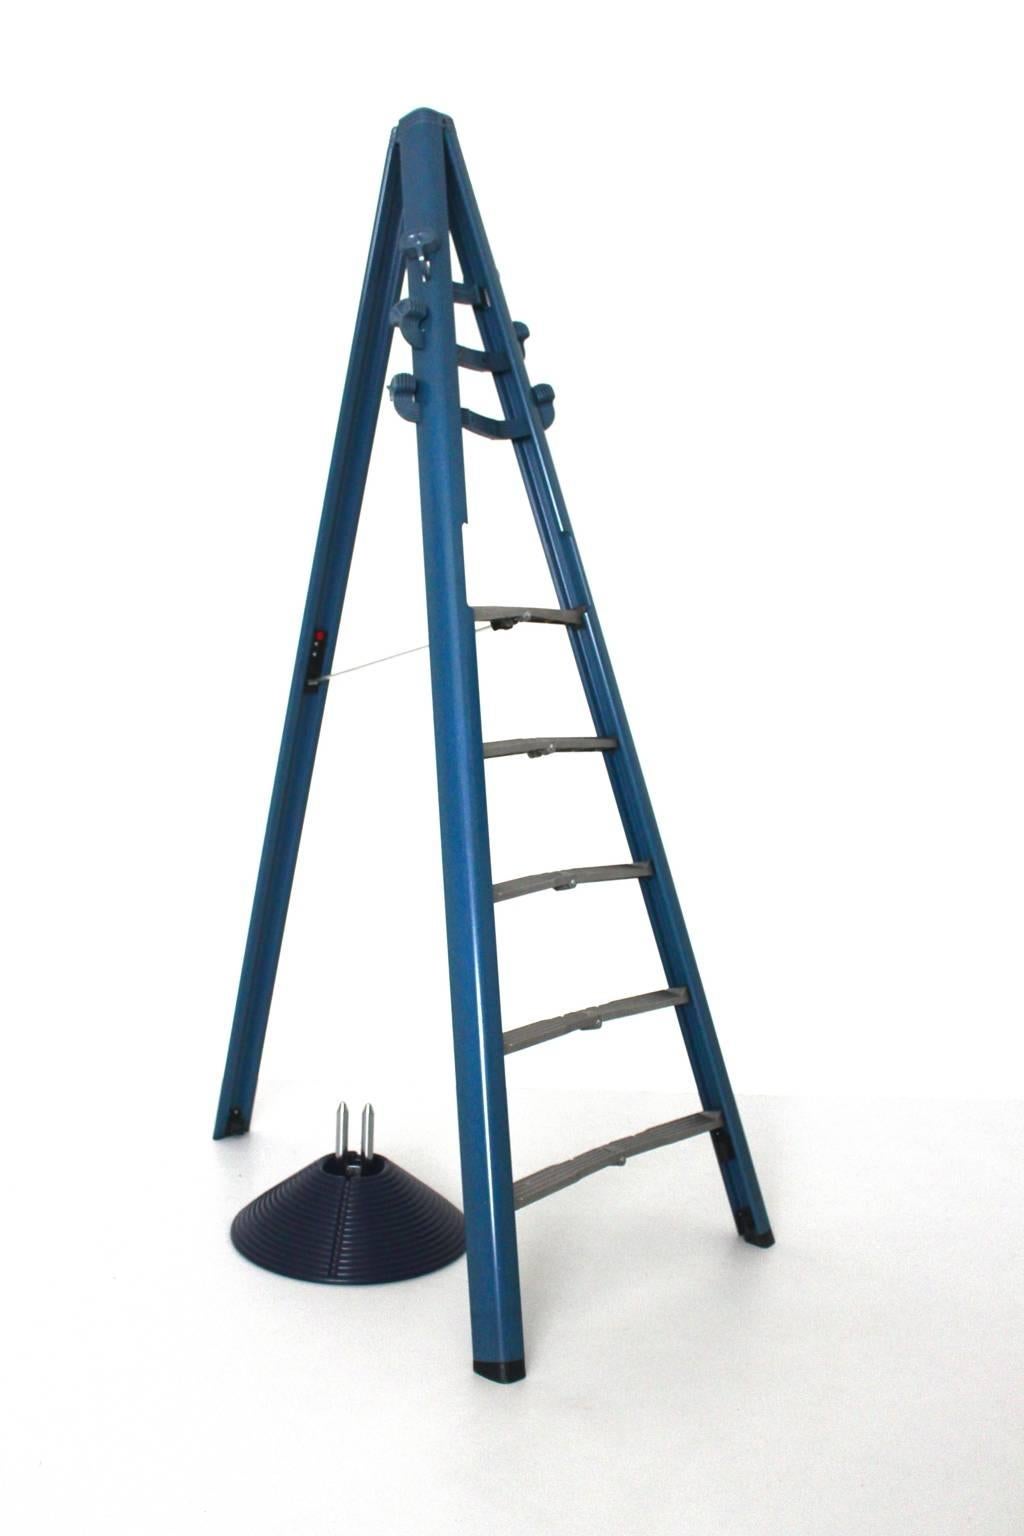 Modern blue vintage coat rack model Dilemma by Giancarlo Piretti and produced by Castilia, Castel S. Pietro (Bo), Italy 1984.
This amazing object features a coat rack and a ladder in one piece and could easily be transformed into a five steps